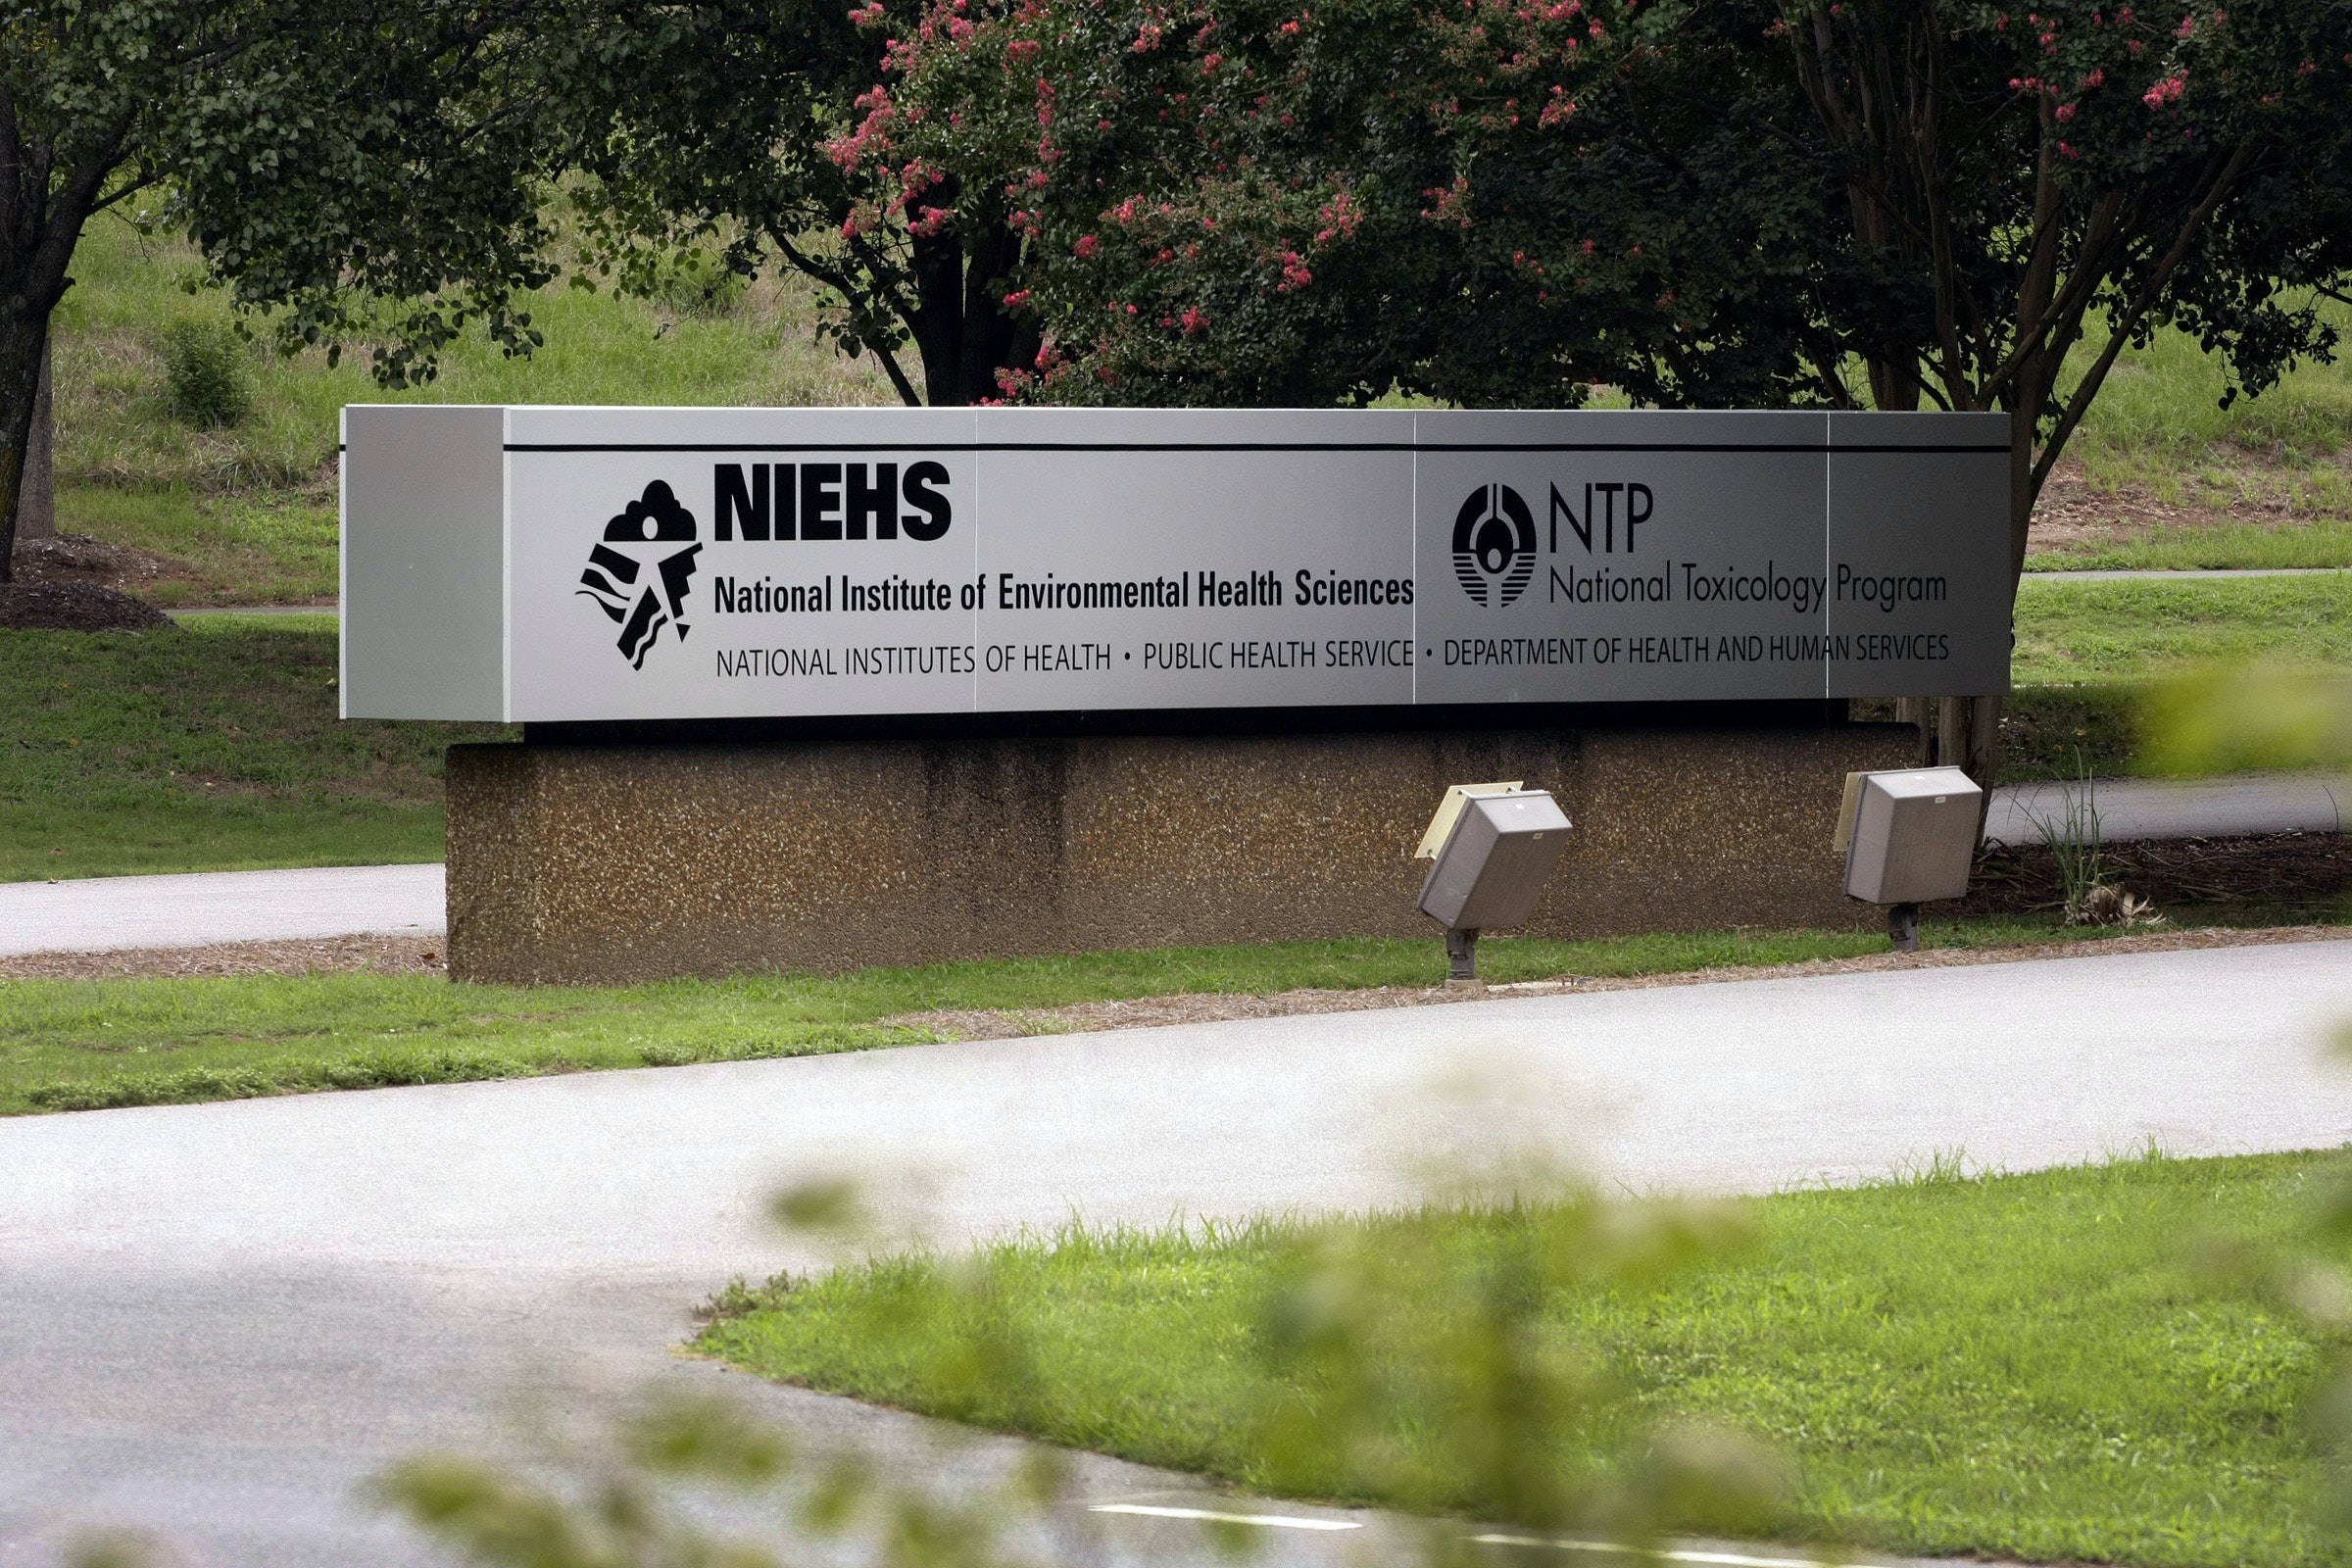 A silver sign showing the National Institute of Environmental Health Sciences and the National Toxicology Program